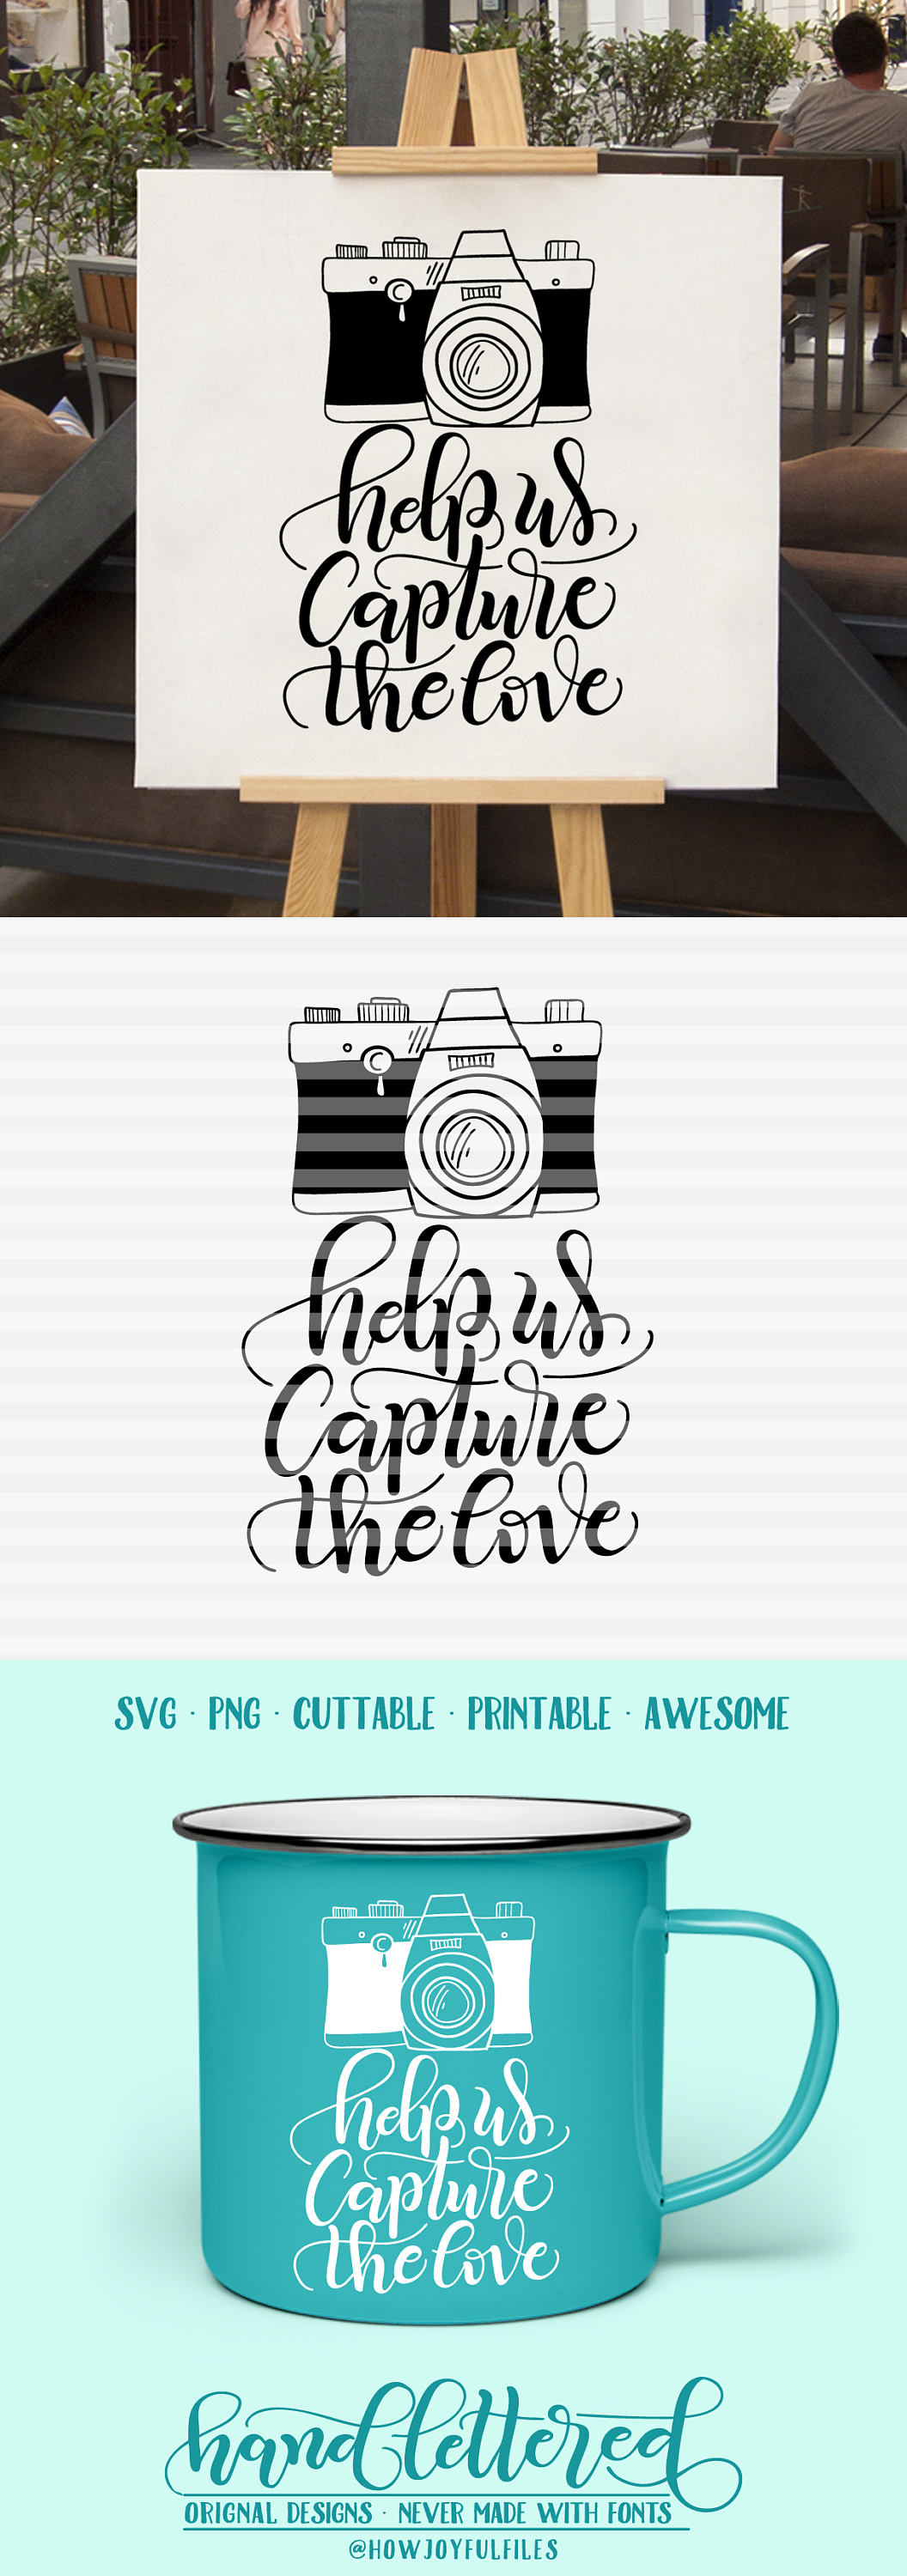 Capture svg #7, Download drawings